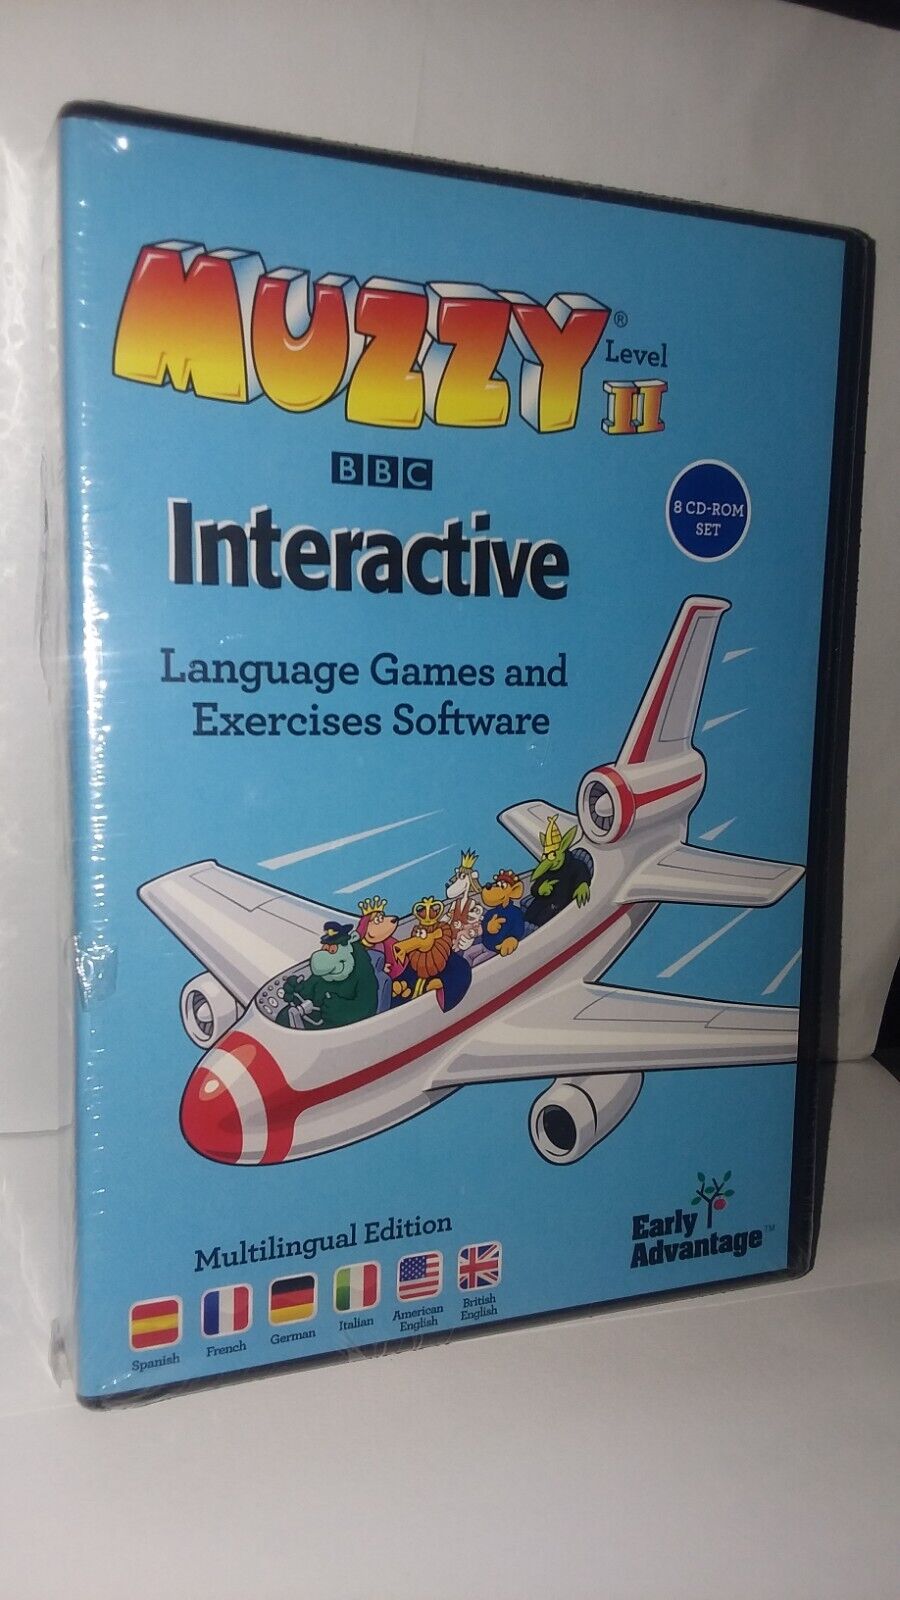 Muzzy Level II Interactive Language Games and Exercises Software.